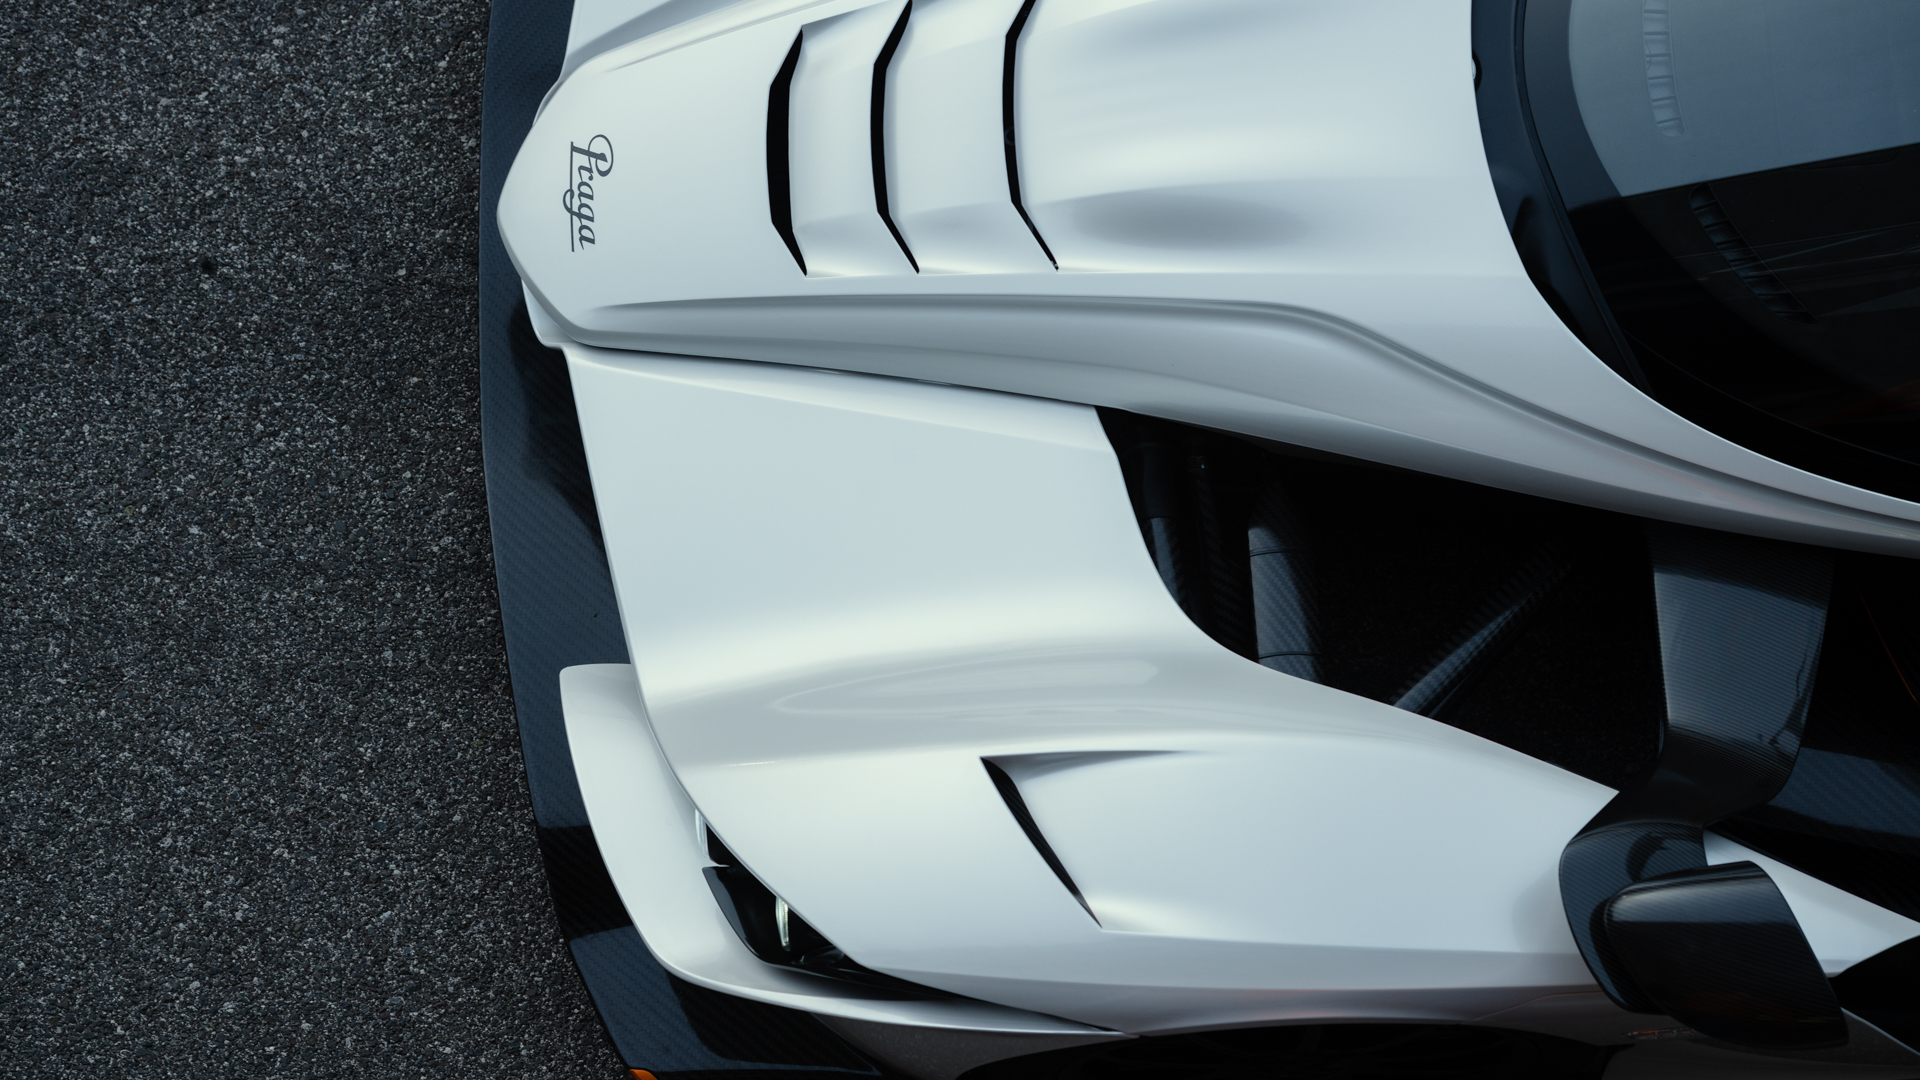 Top view of splitter, hood vents and NACA ducts